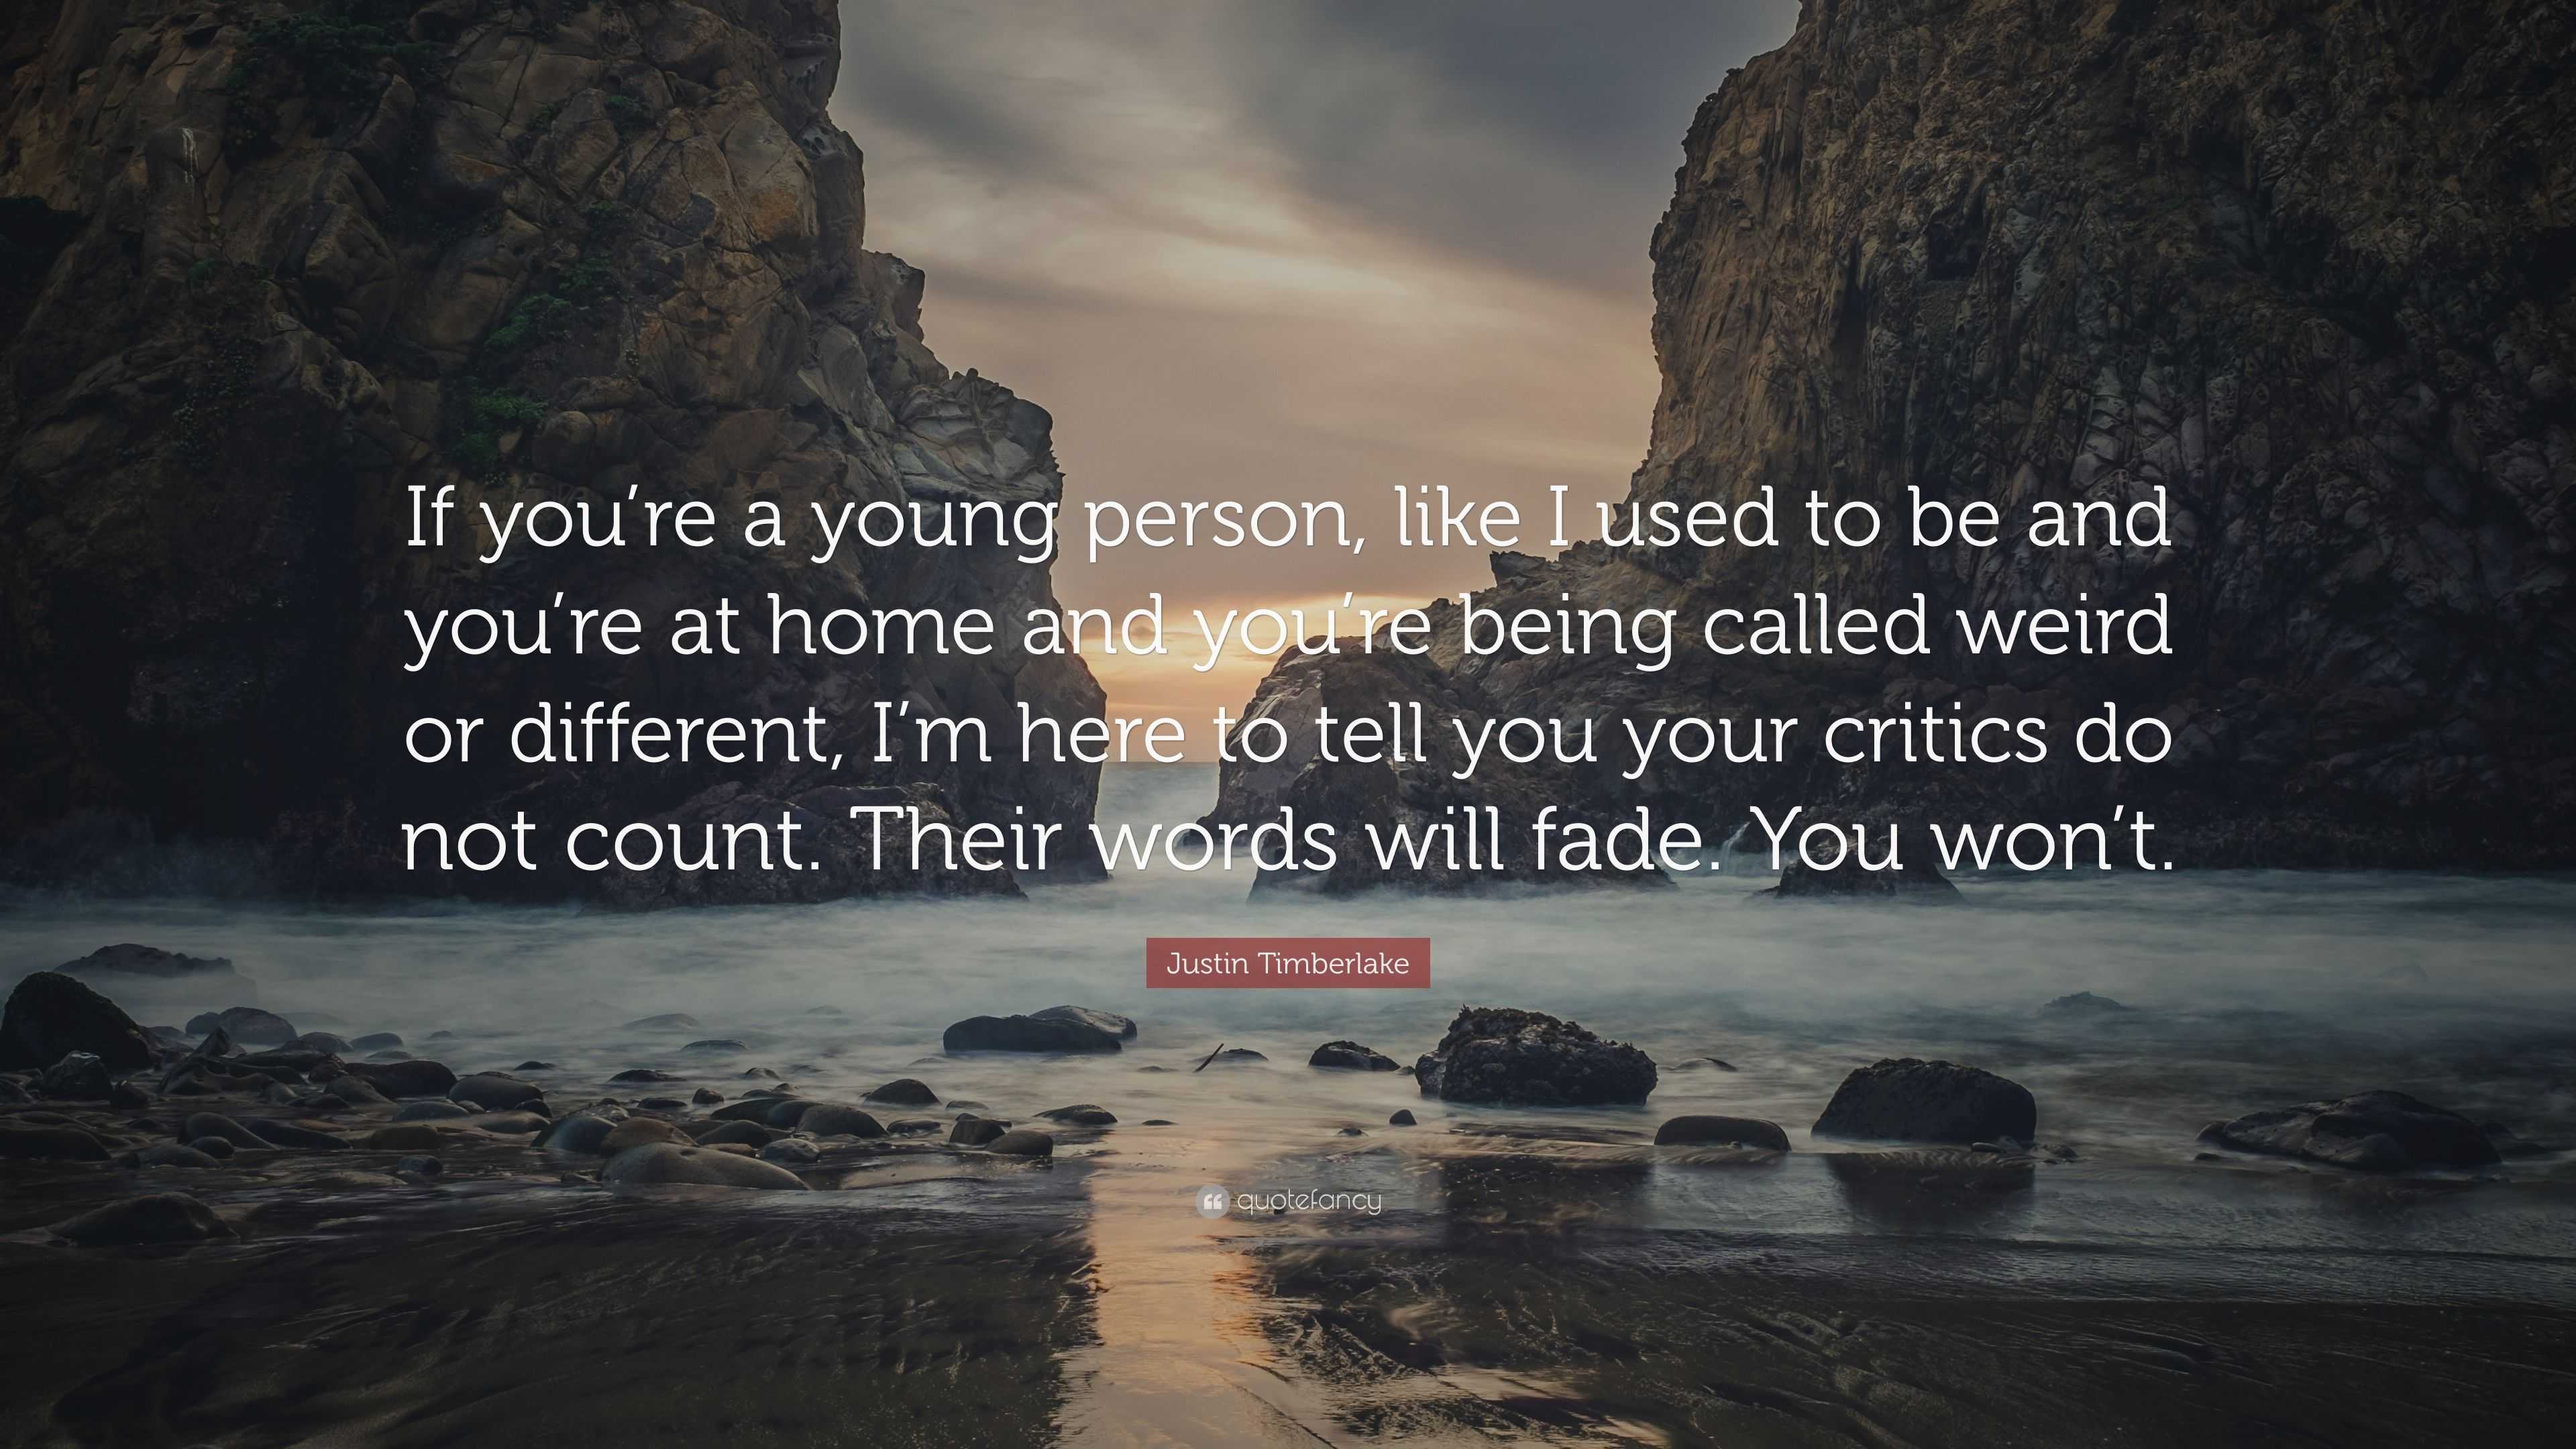 Justin Timberlake Quote: “If you’re a young person, like I used to be ...